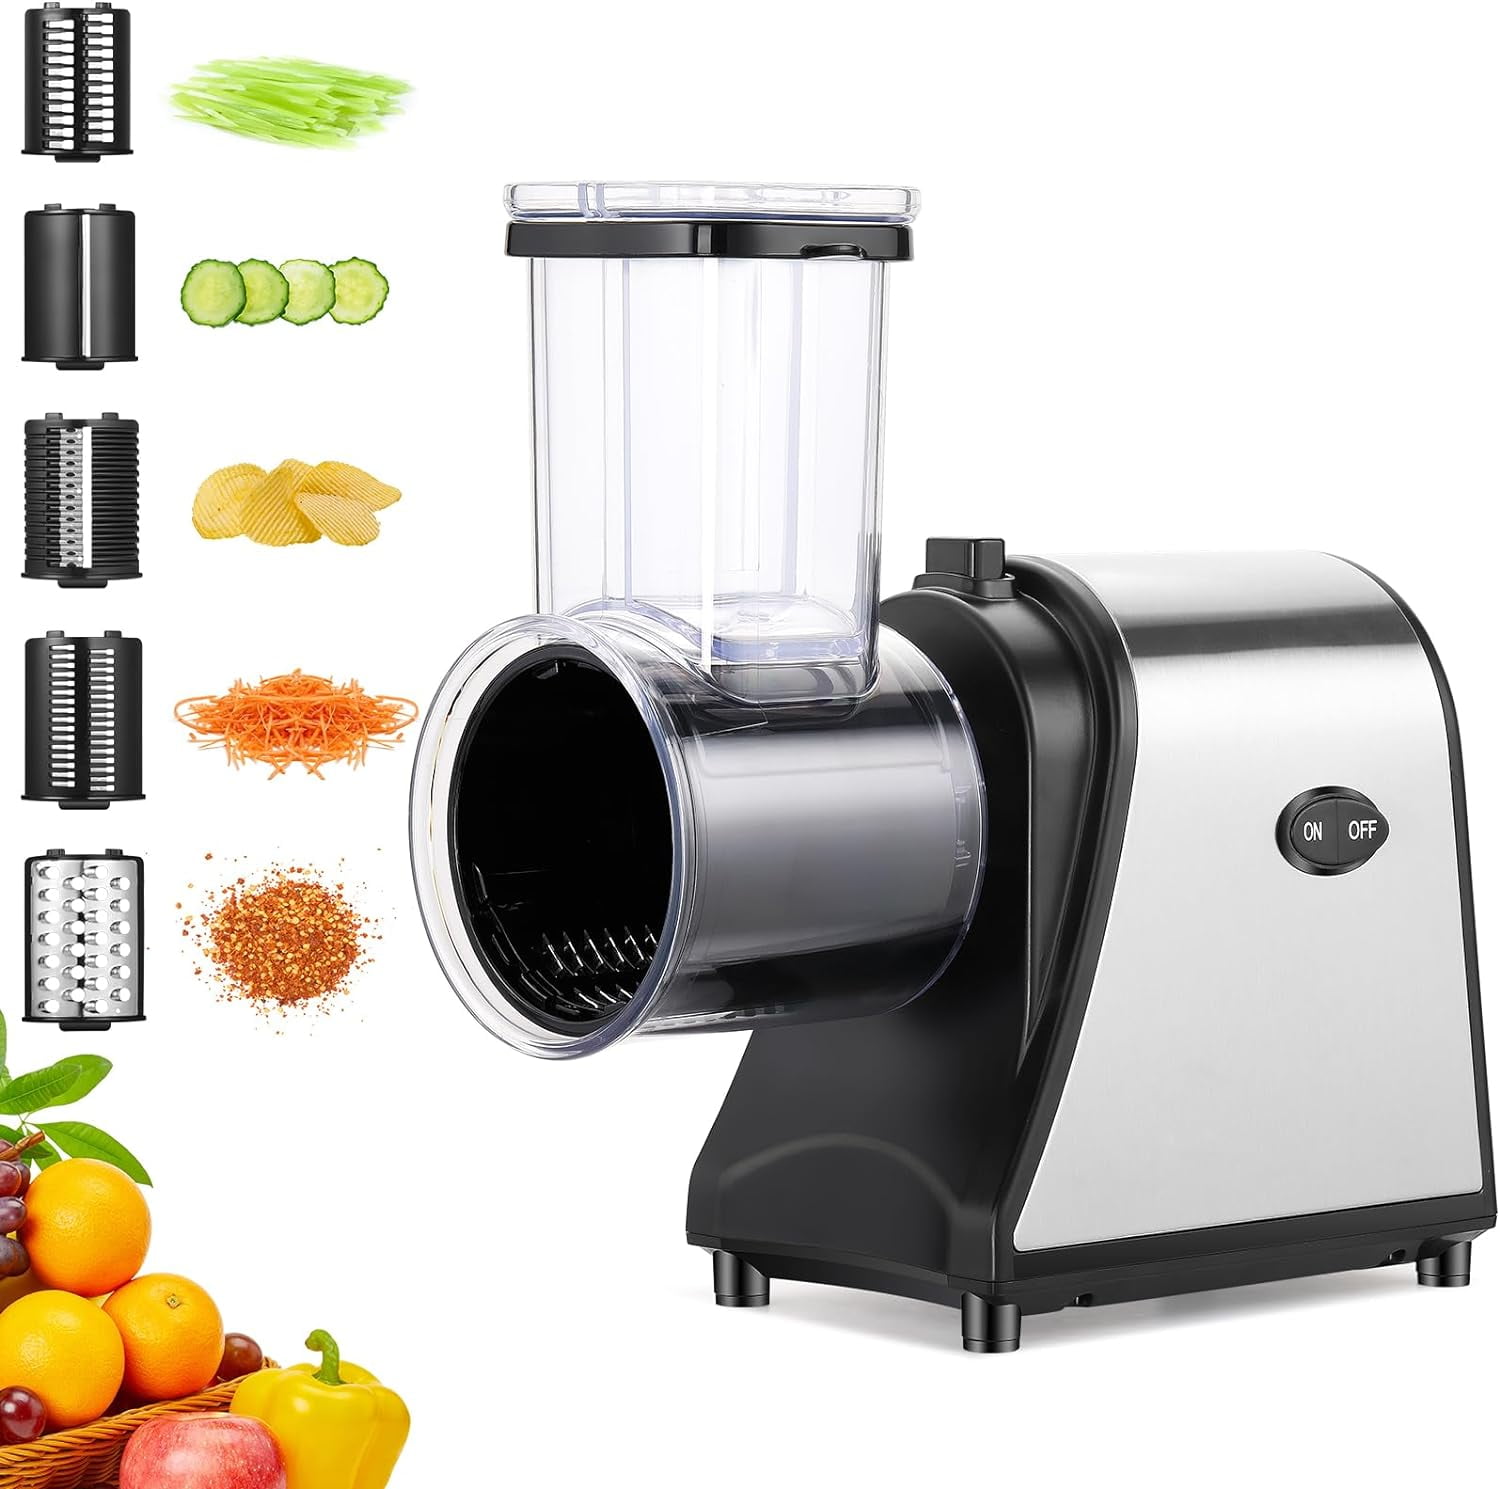 Electric Cheese Grater, Cheese Grater Electric, One-Touch Control Electric  Grater Machine for Vegetable, Fruits, Potato, Electric Cheese Shredder